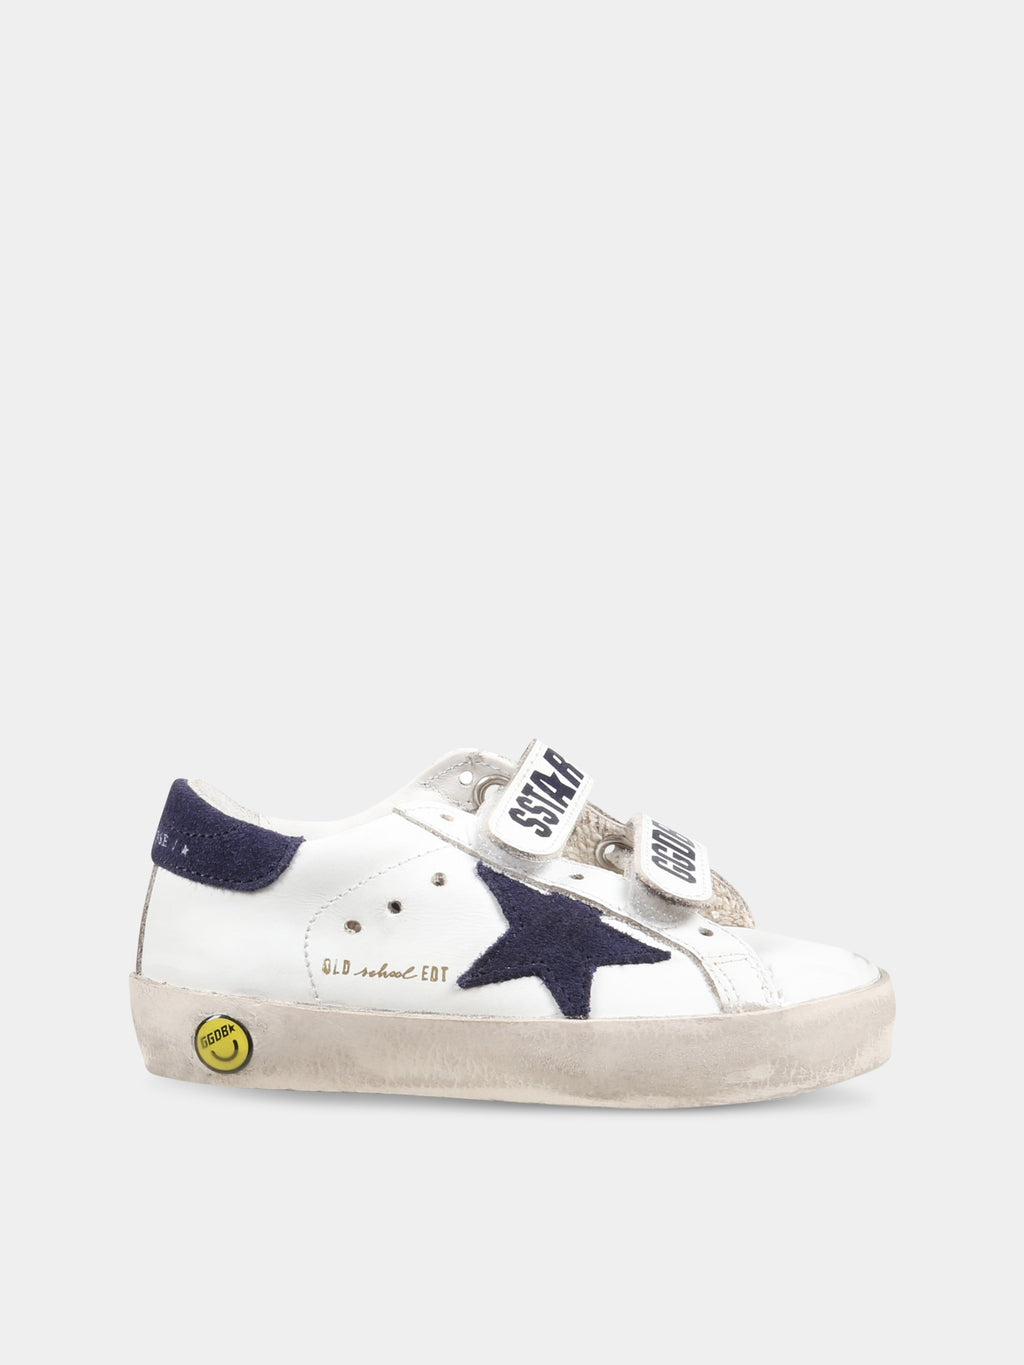 White ''Old school'' sneaker for kids with blue star